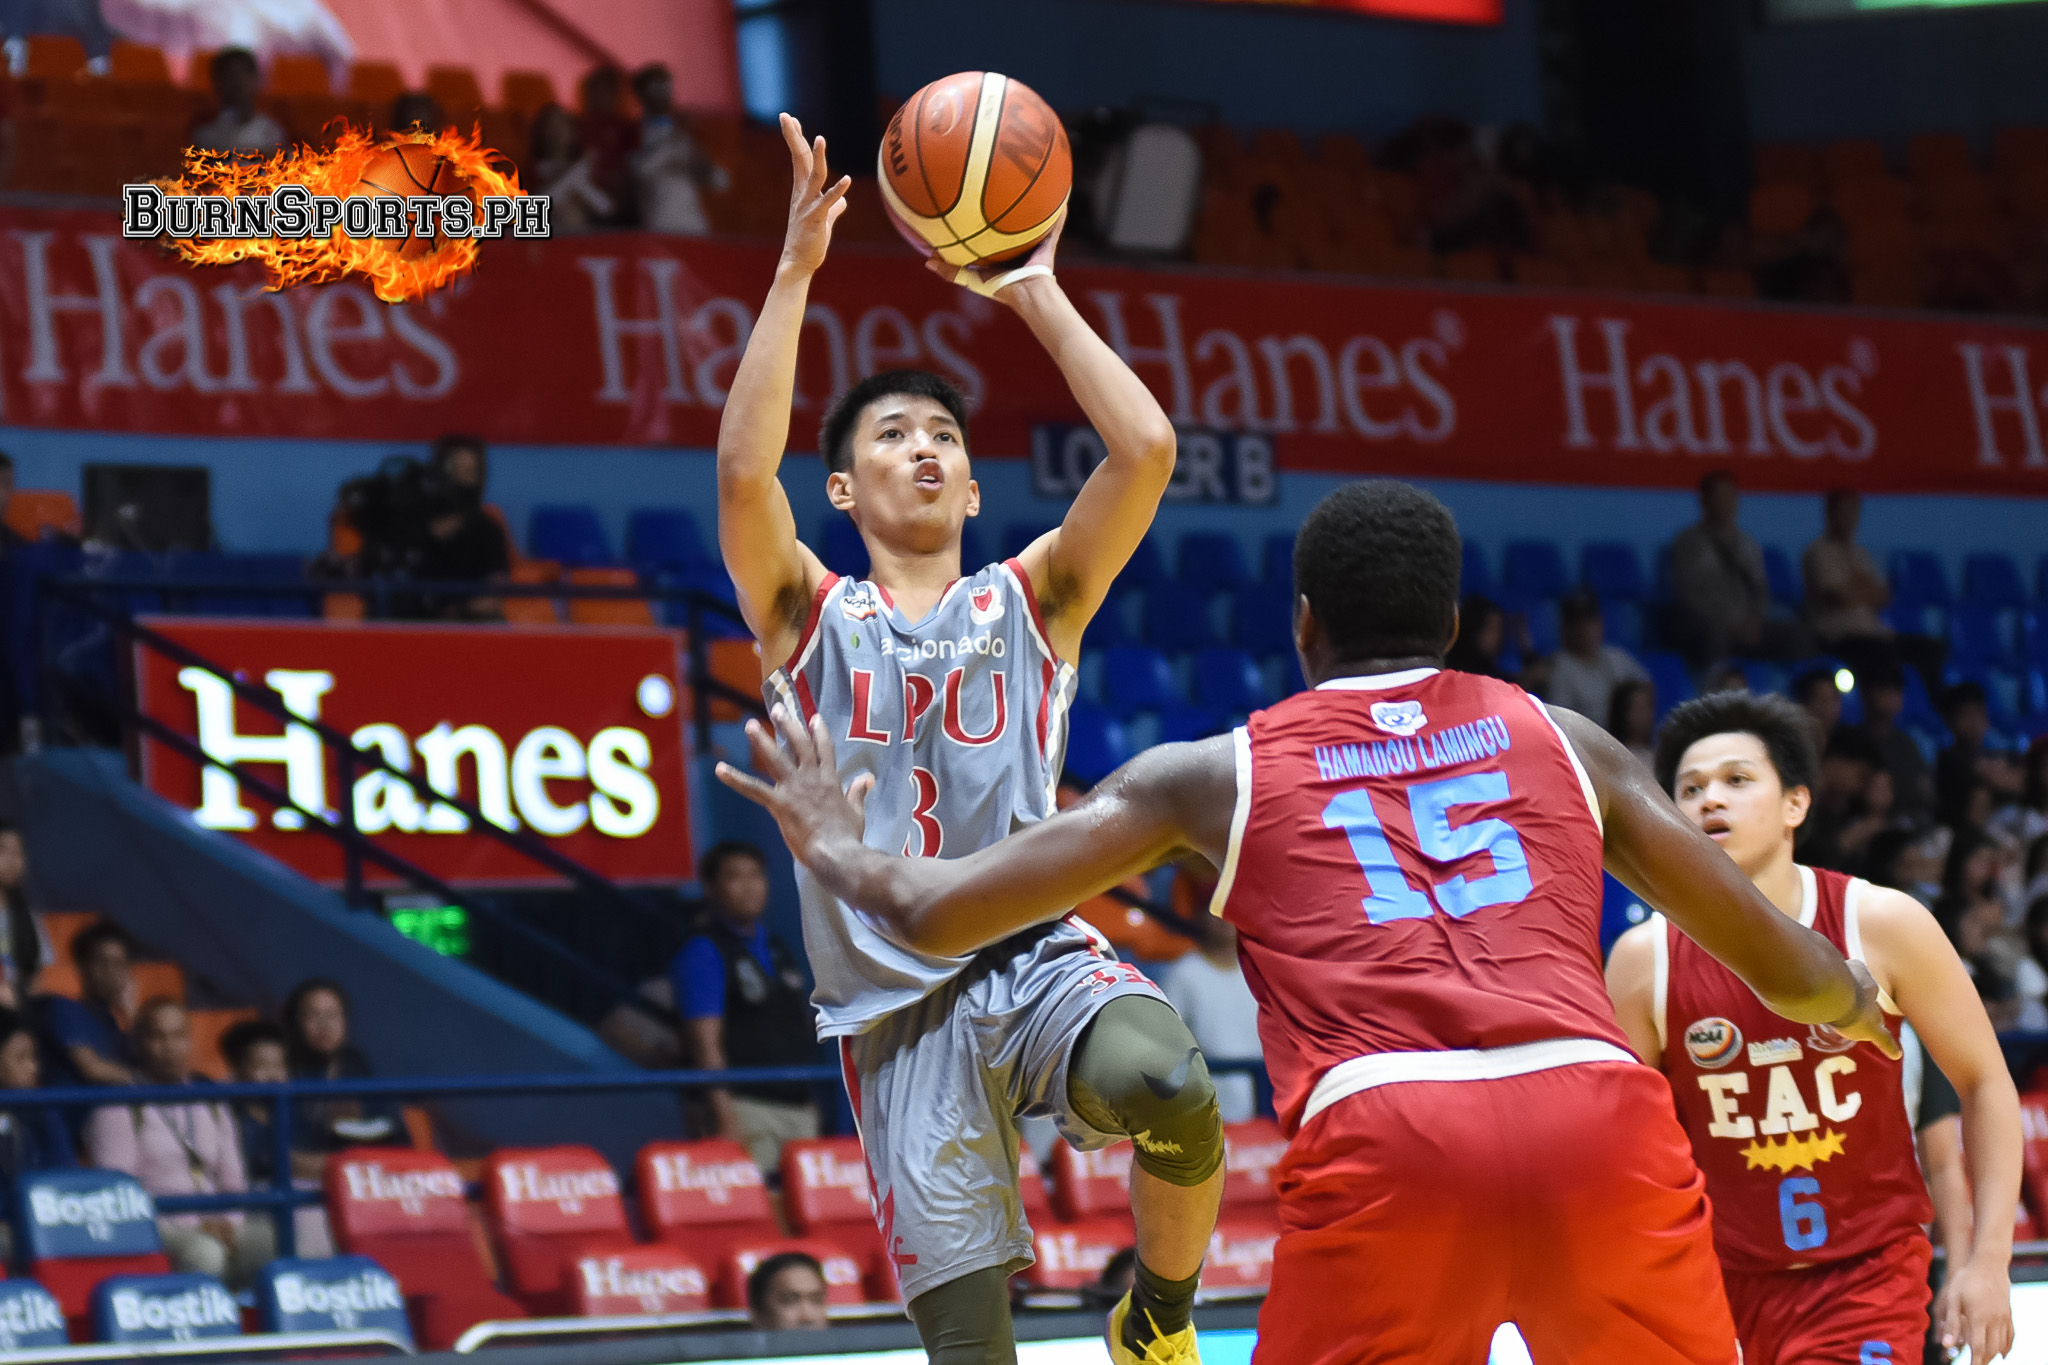 Lyceum relies on defense in second half to trounce EAC